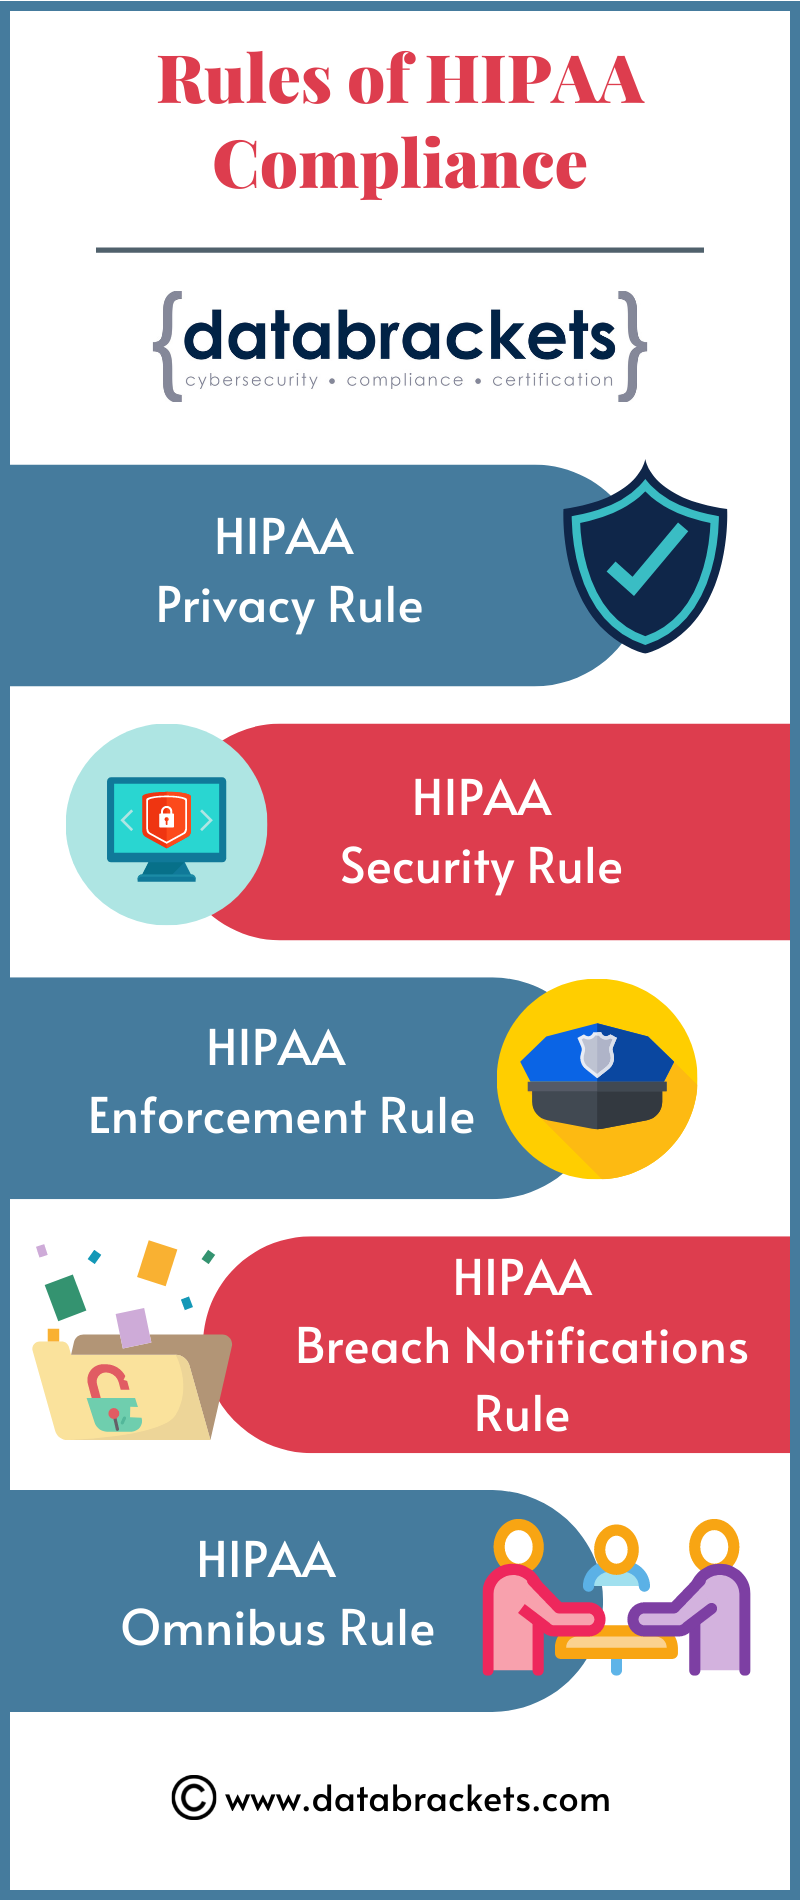 research and hipaa privacy protections citi